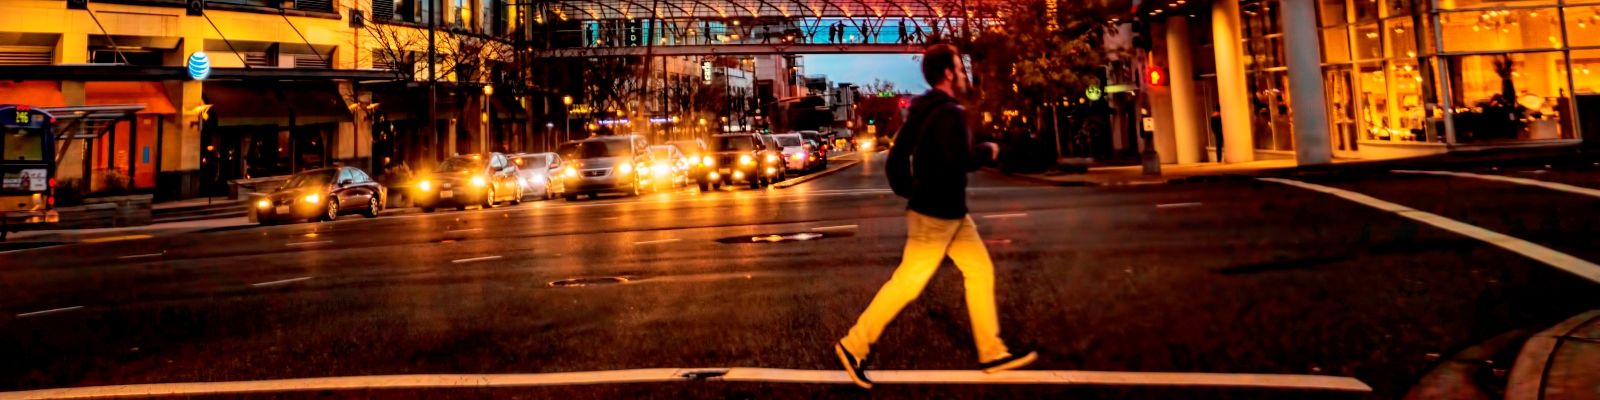 Image of a pedestrian crossing a street, a public right-of-way, at night